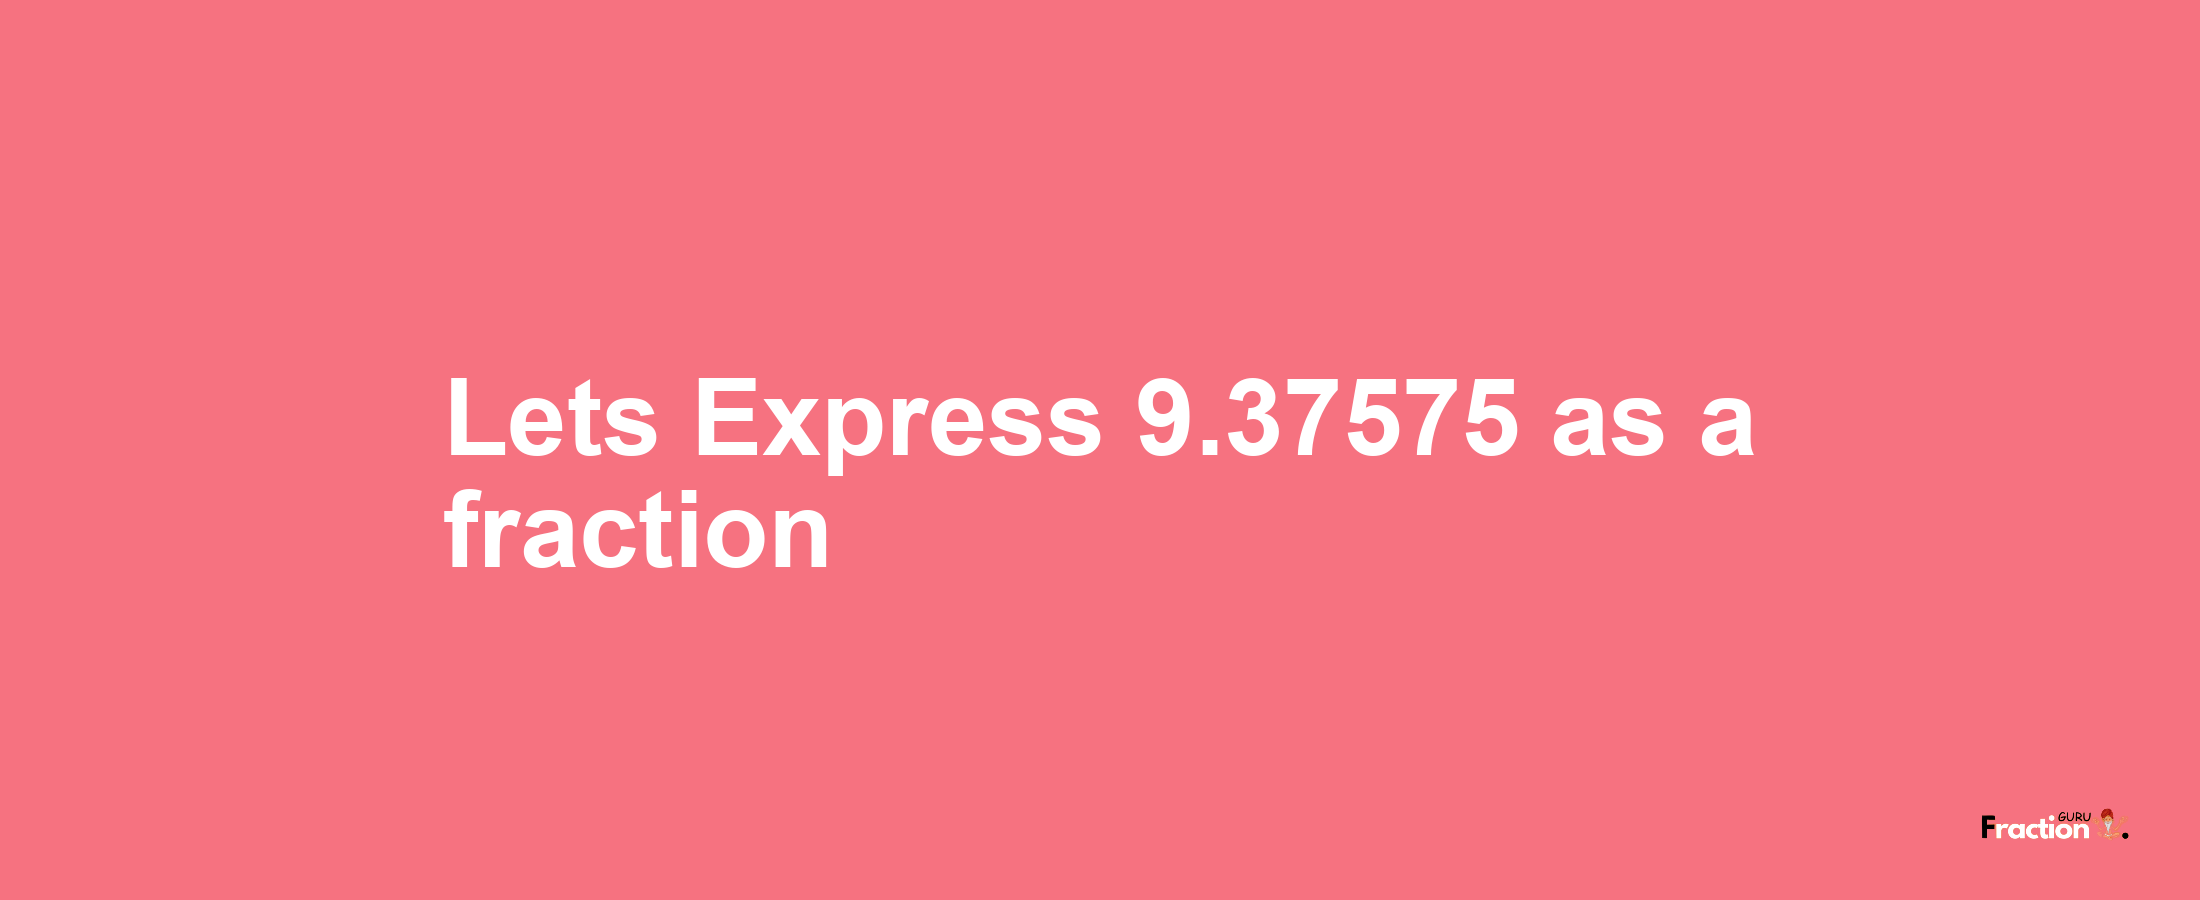 Lets Express 9.37575 as afraction